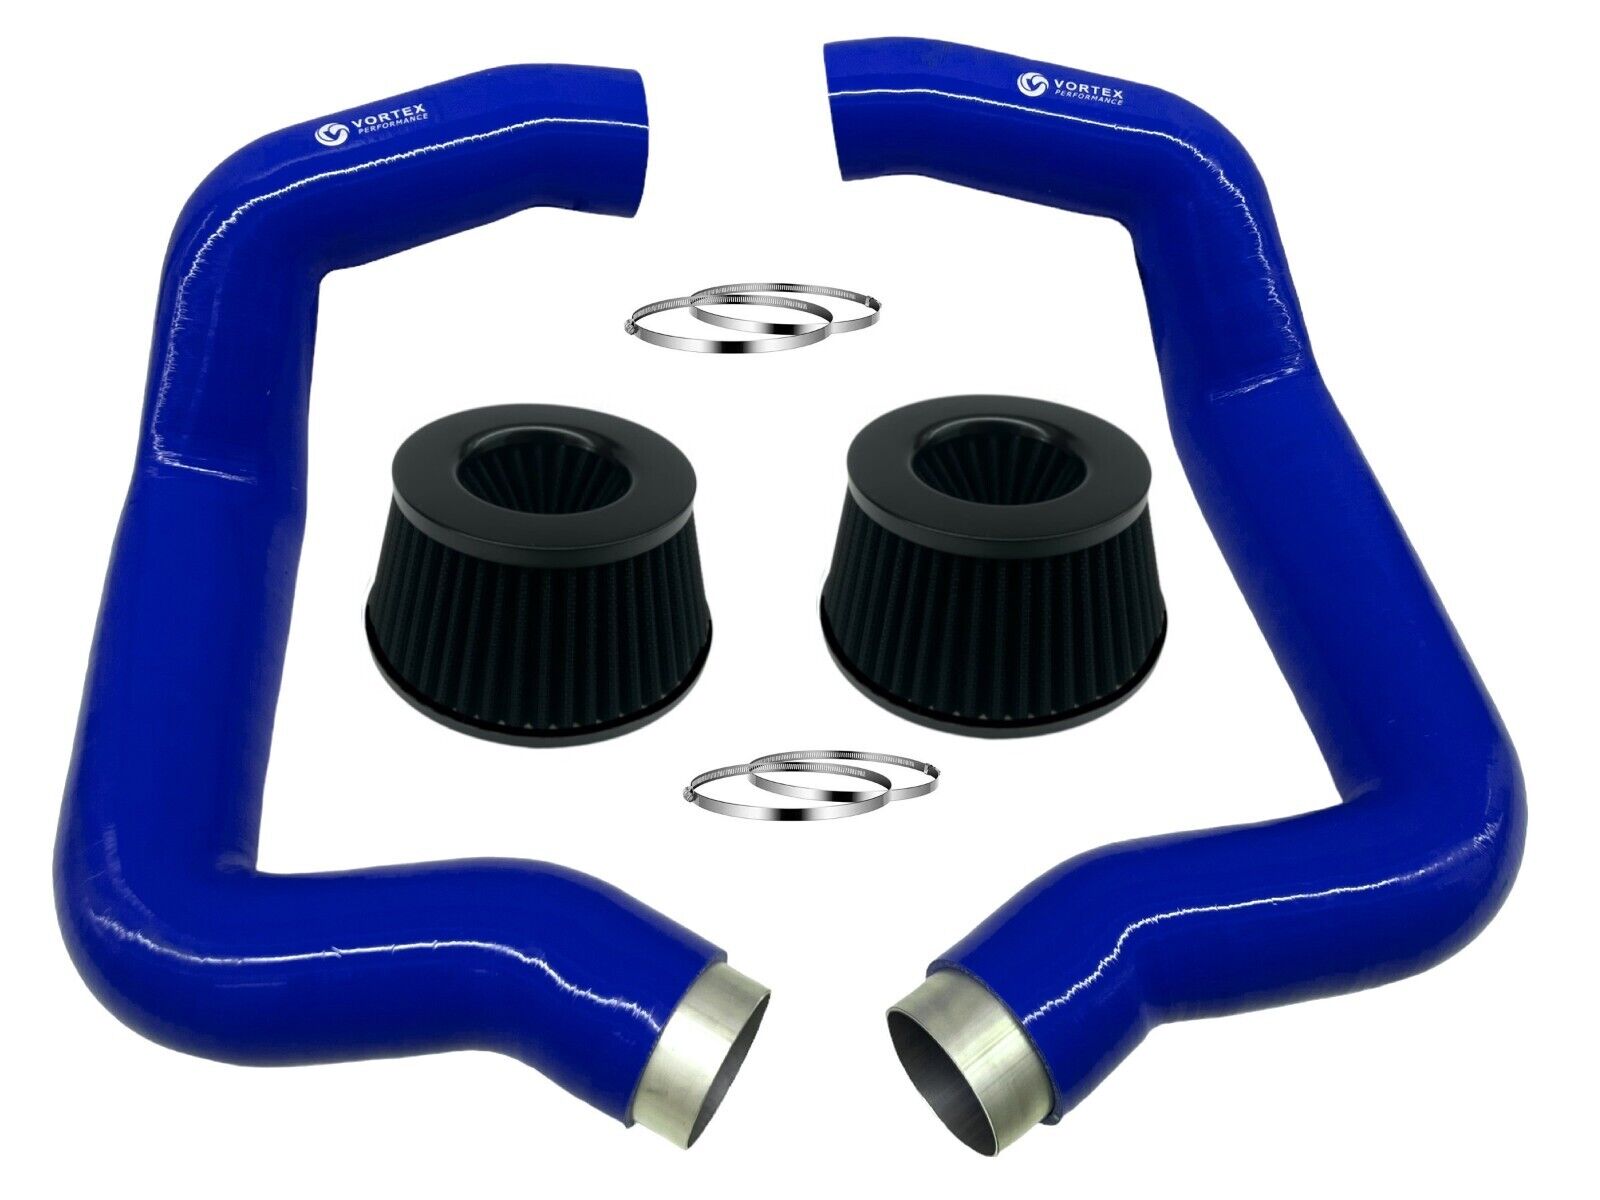 for BMW F90 M5 M8 G30 M550I Full Front Mount air intake - BLUE (2 air filters)